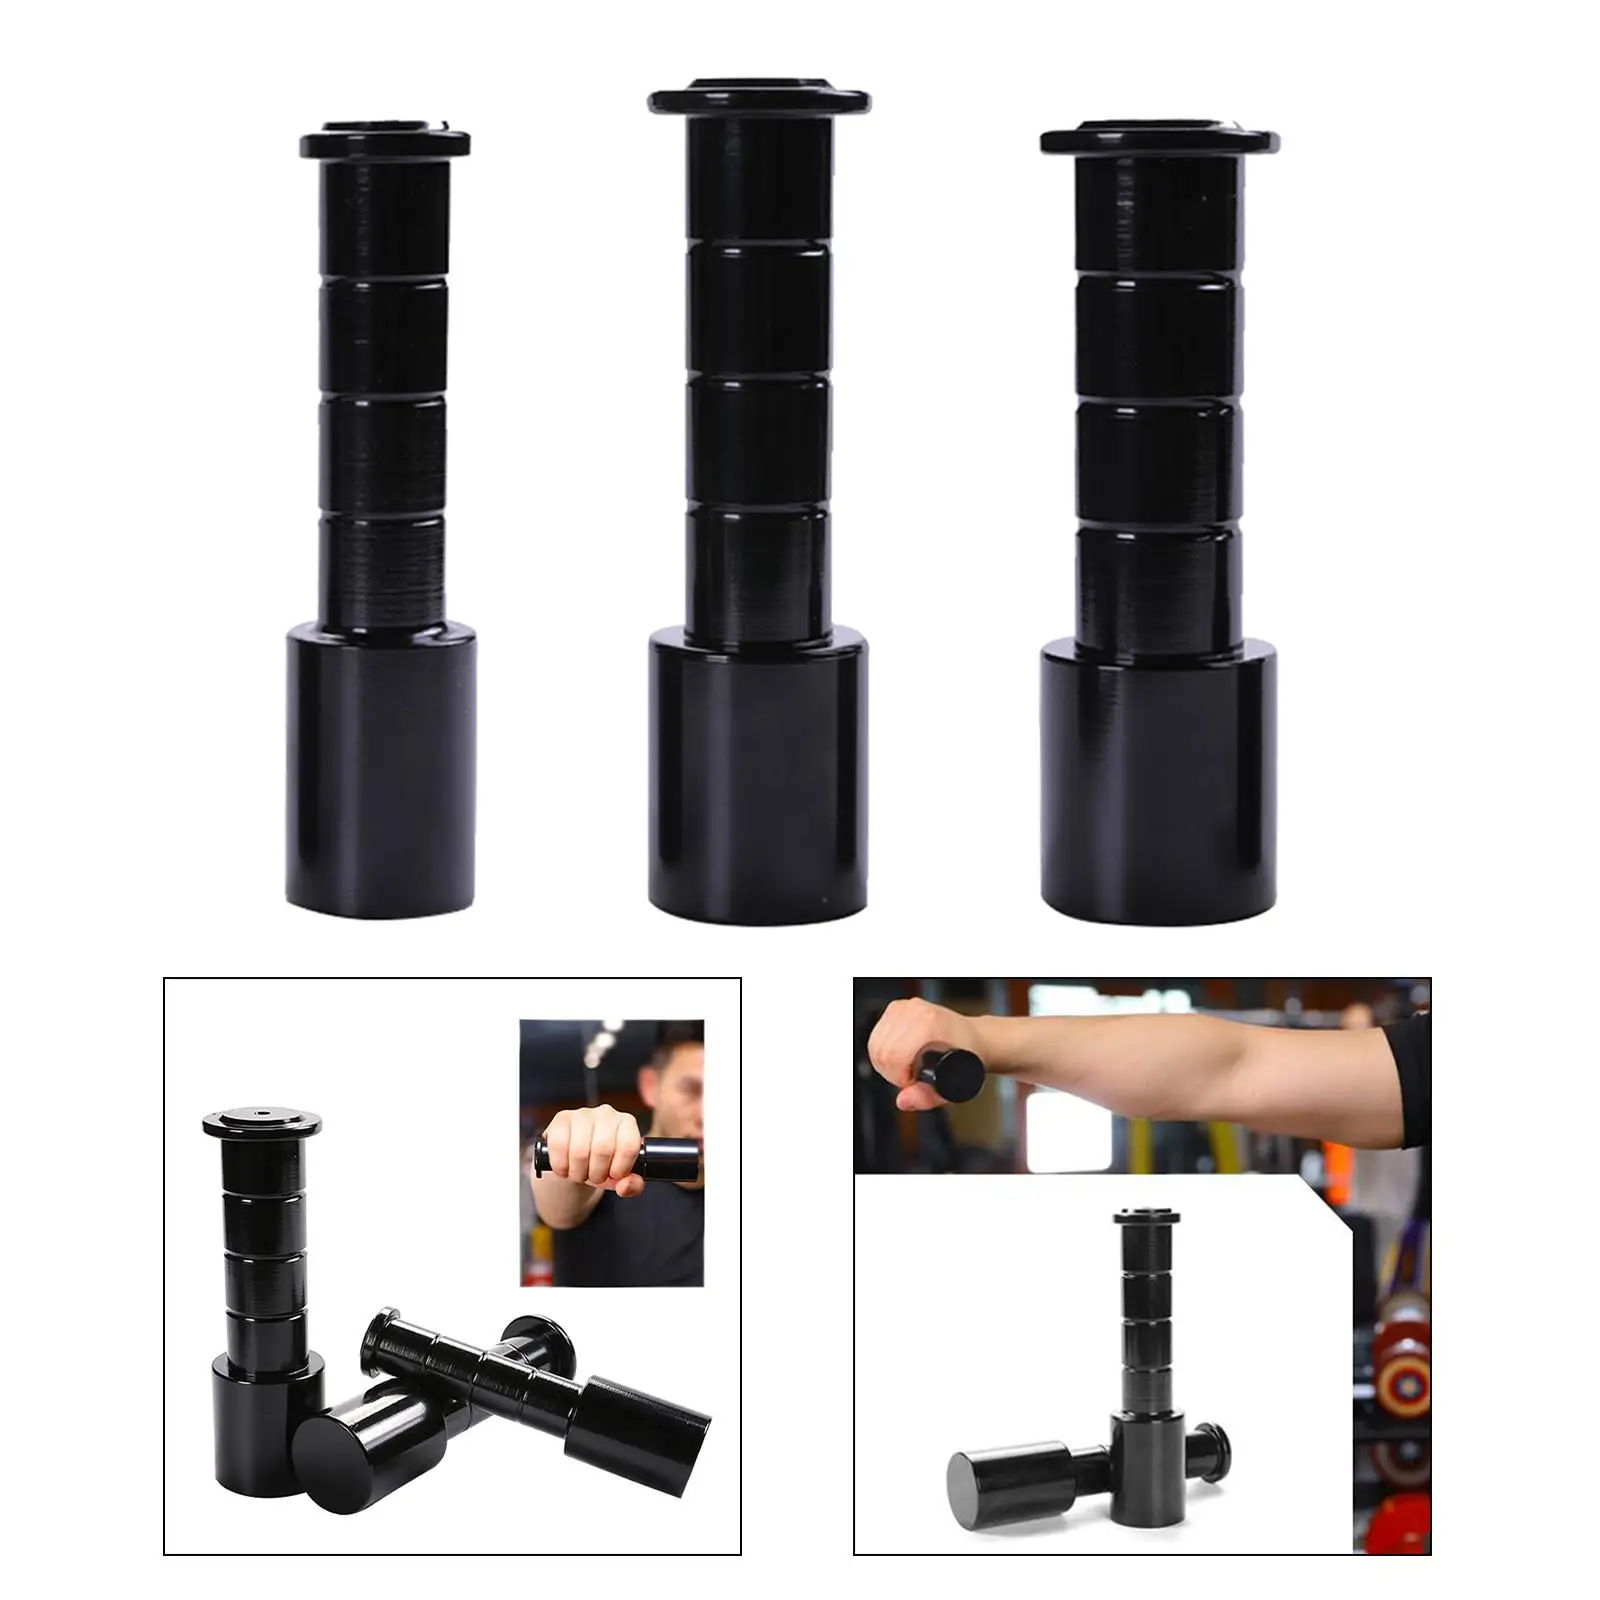 Hand Weight Women Non Slide Body Building Boxing Speed Training for Fitness Workout Jogging Shadowboxing Walking